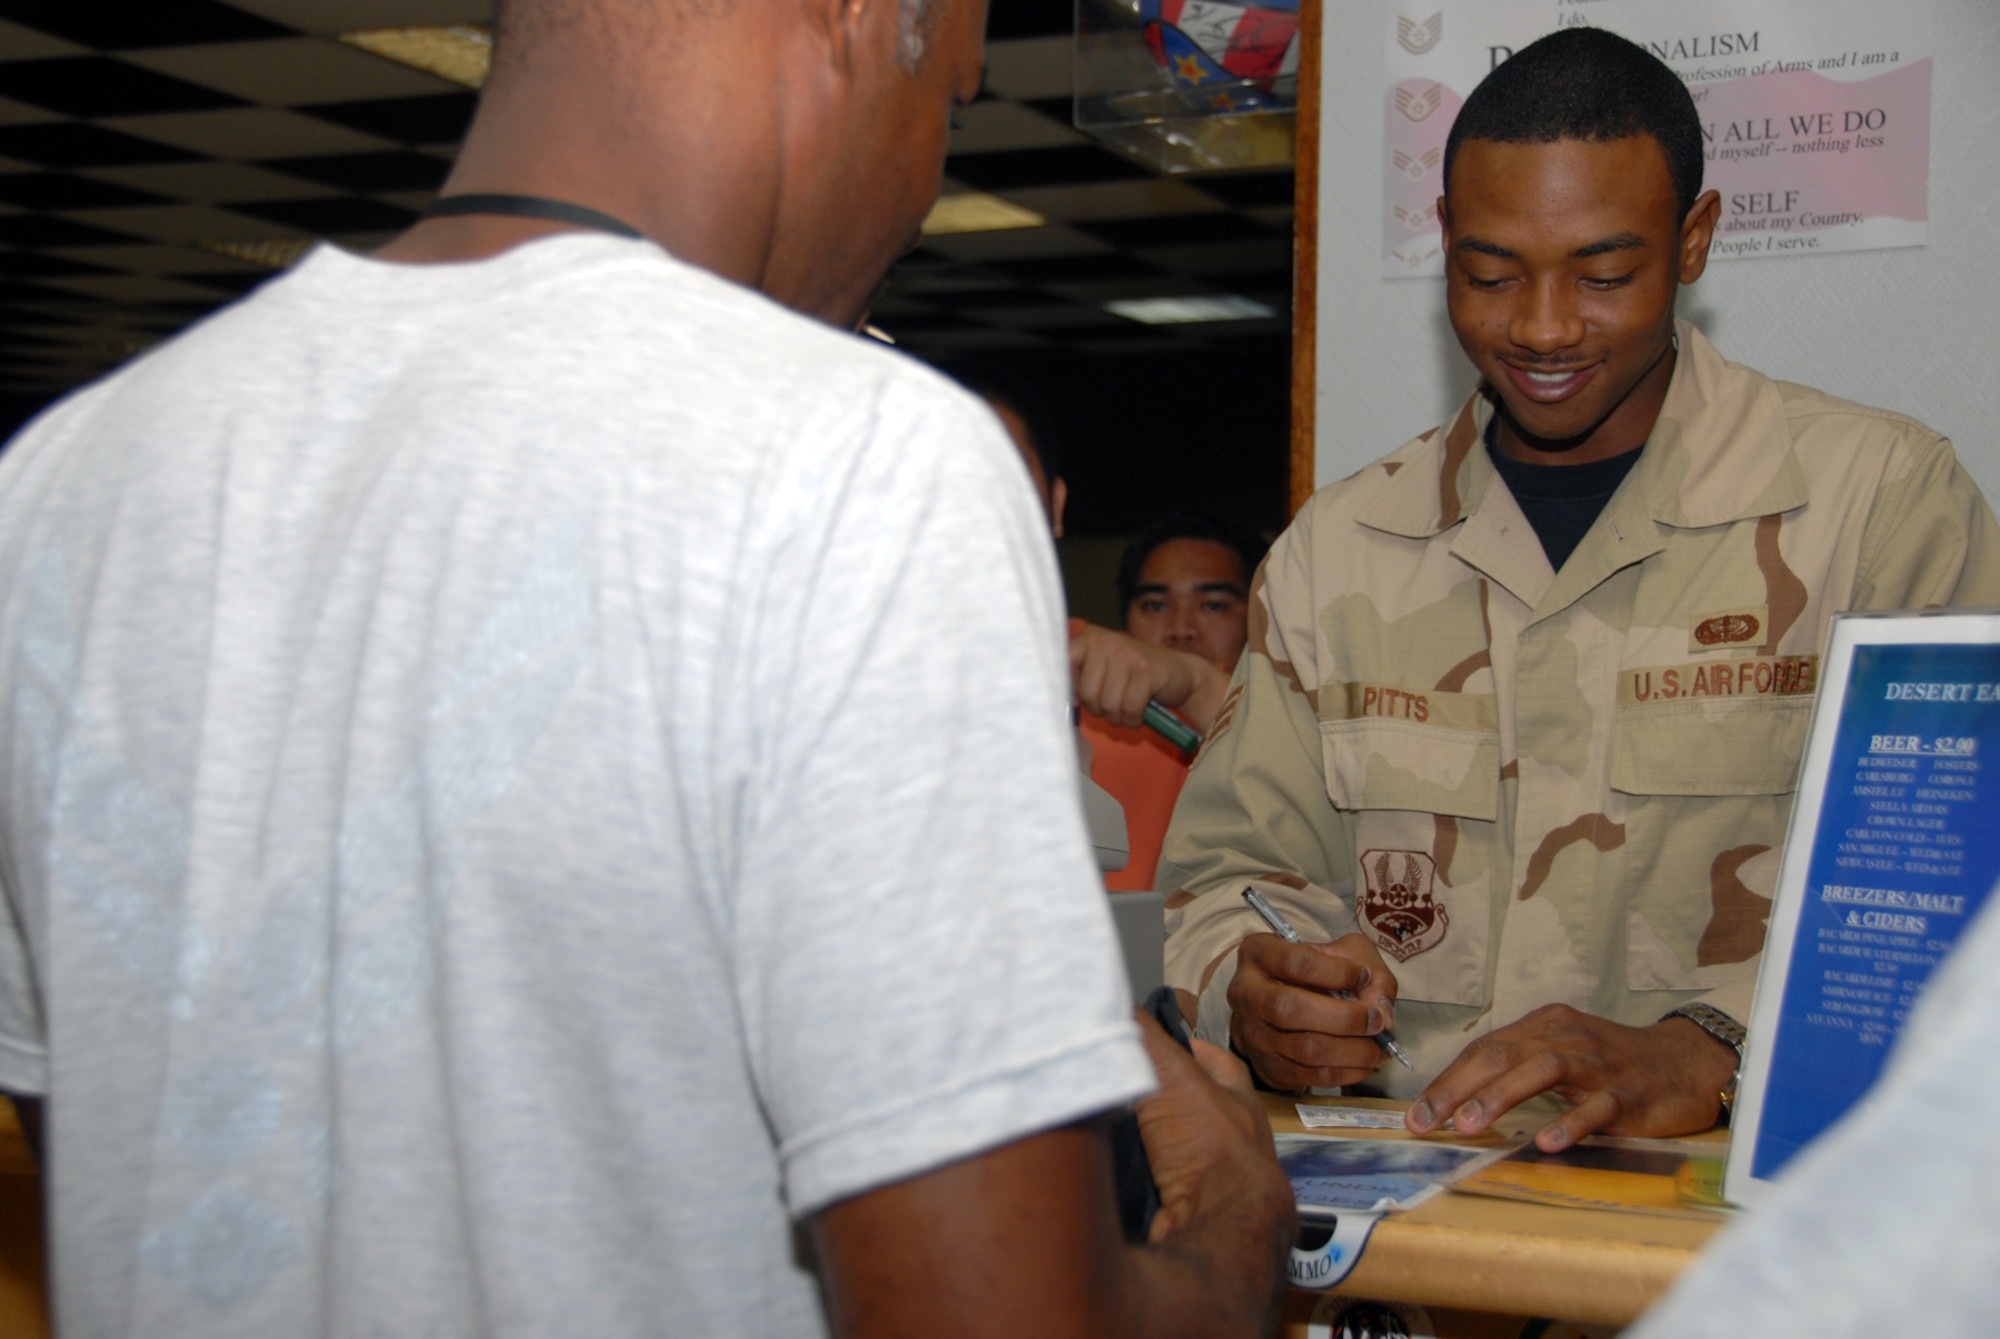 Senior Airman Corey Pitts, 379th Expeditionary Services Squadron, prepares to complete a transaction at the Desert Eagle Lounge. The services squadron offered 16 new college classes this rotation, and saved the Air Force $537,000 in tuition assistance by administering 19 percent of all CLEP exams in Air Combat Command. The 379th Expeditionary Mission Support Group also awarded and executed more than 62 construction projects worth more than $25 million. (U.S. Air Force photo by Airman 1st Class Ashley Tyler)